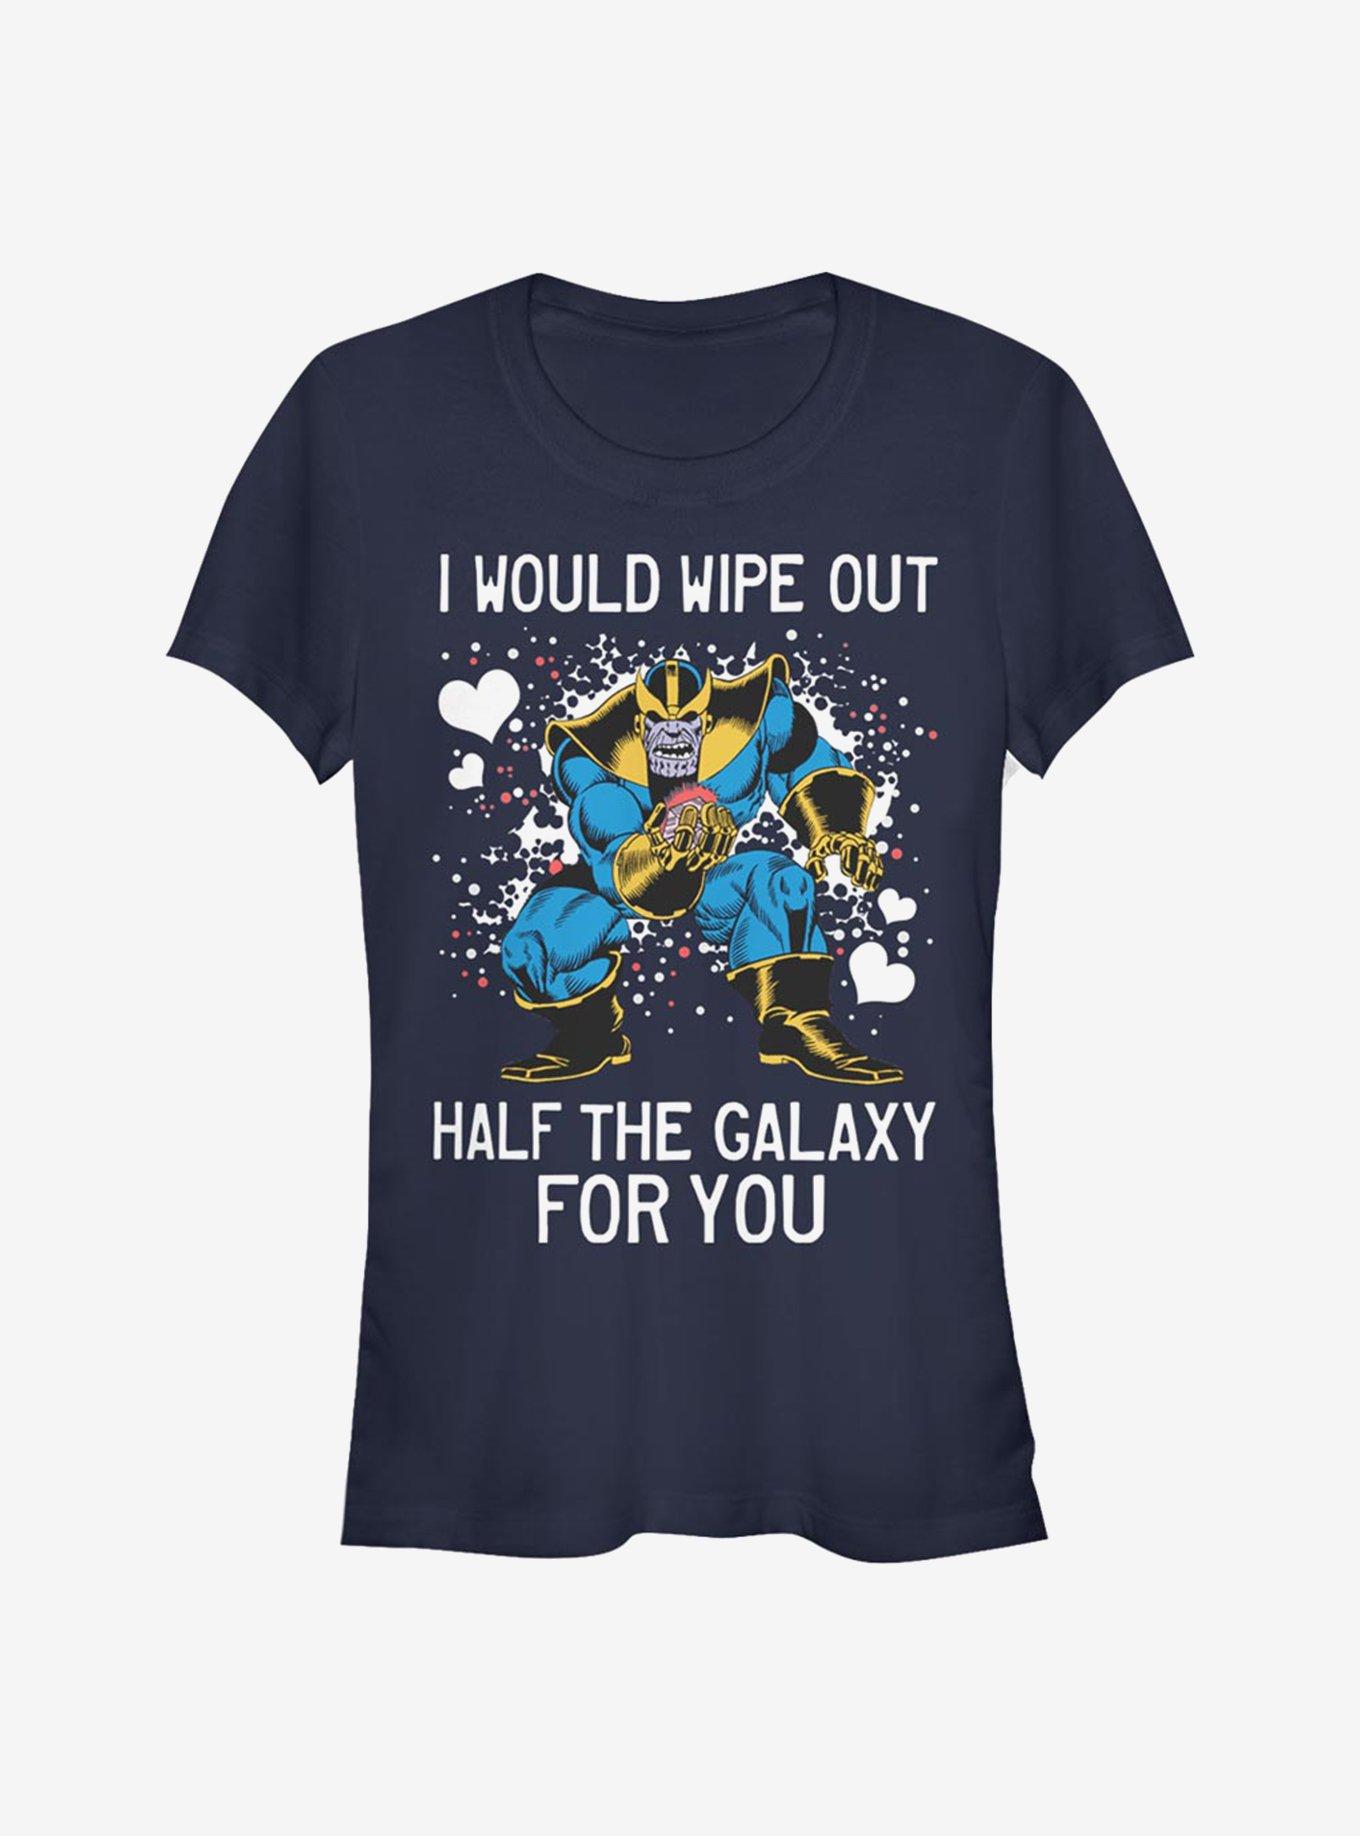 Marvel Avengers Thanos Wipe Galaxy Out Girls T-Shirt